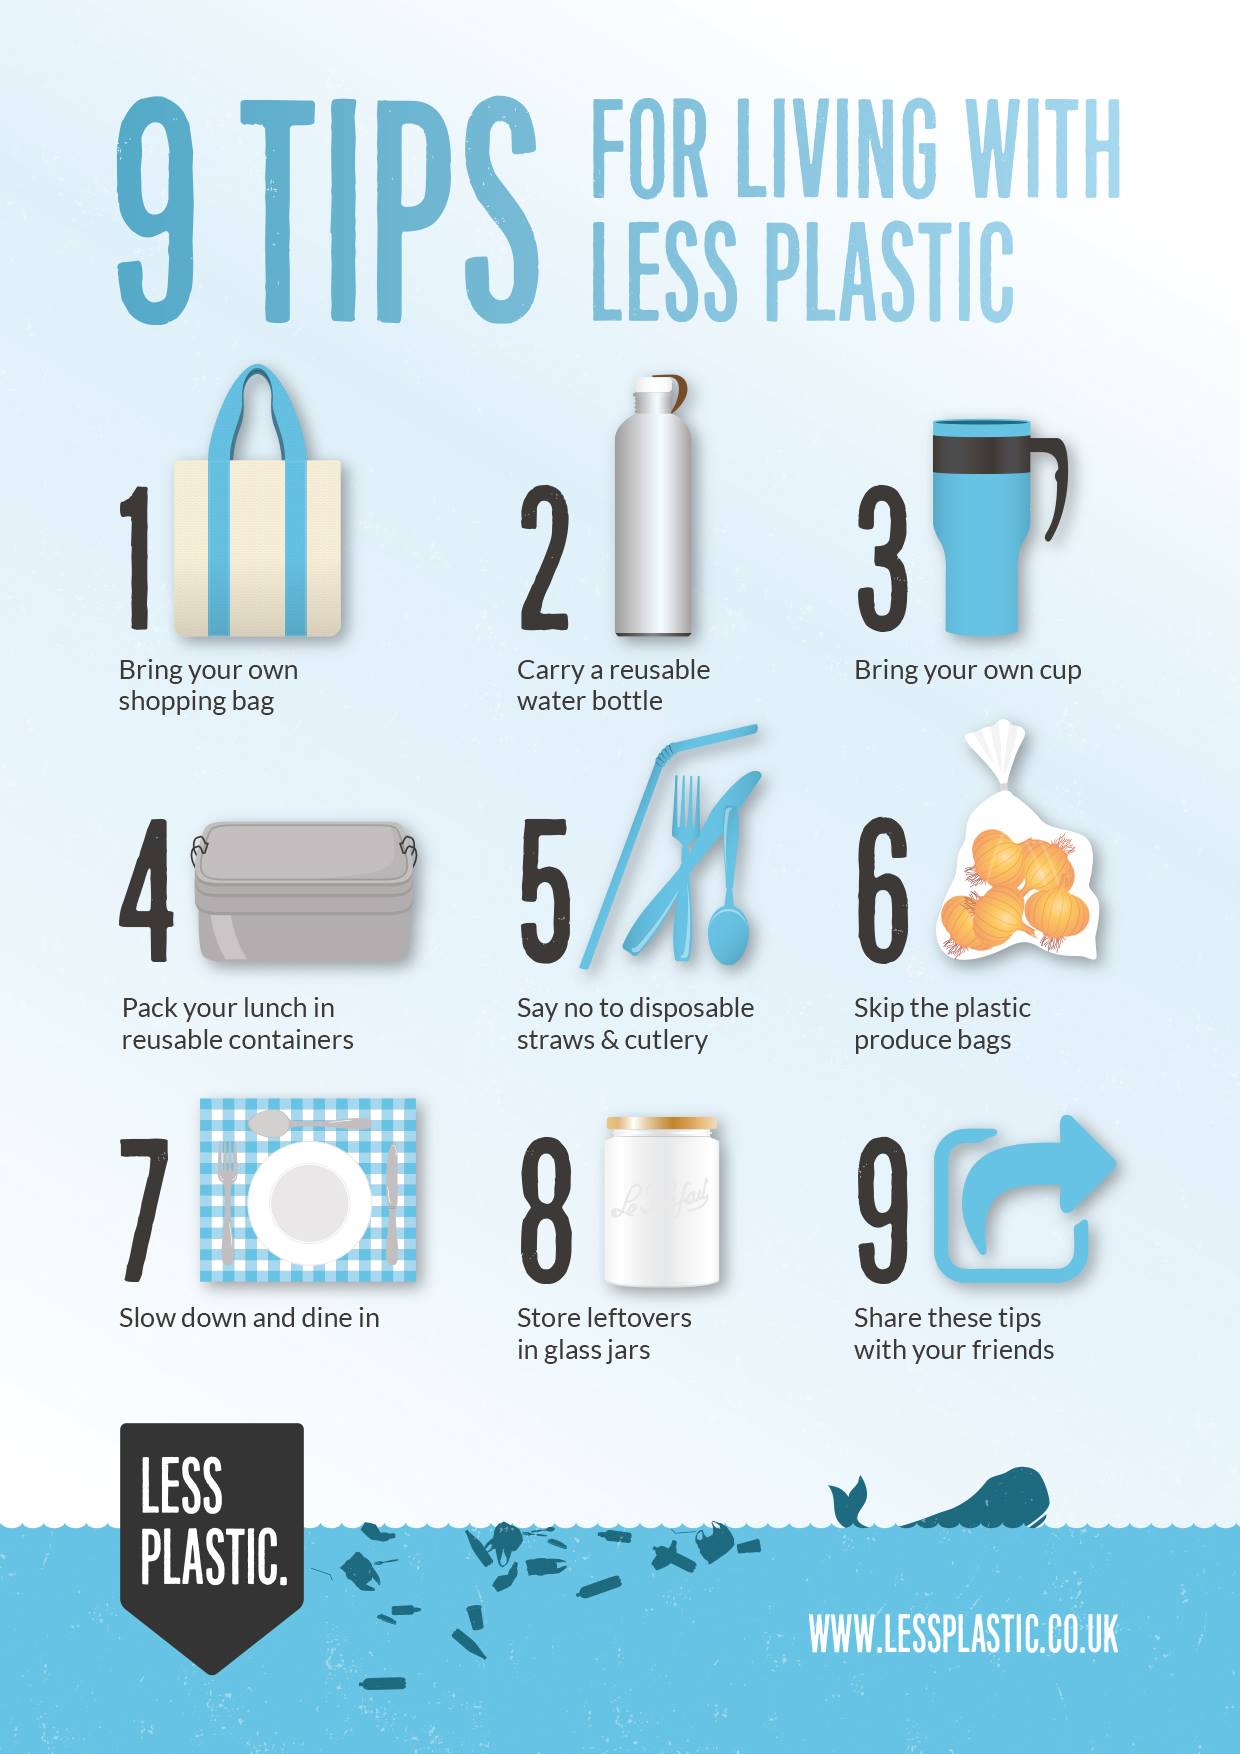 Living with less plastic